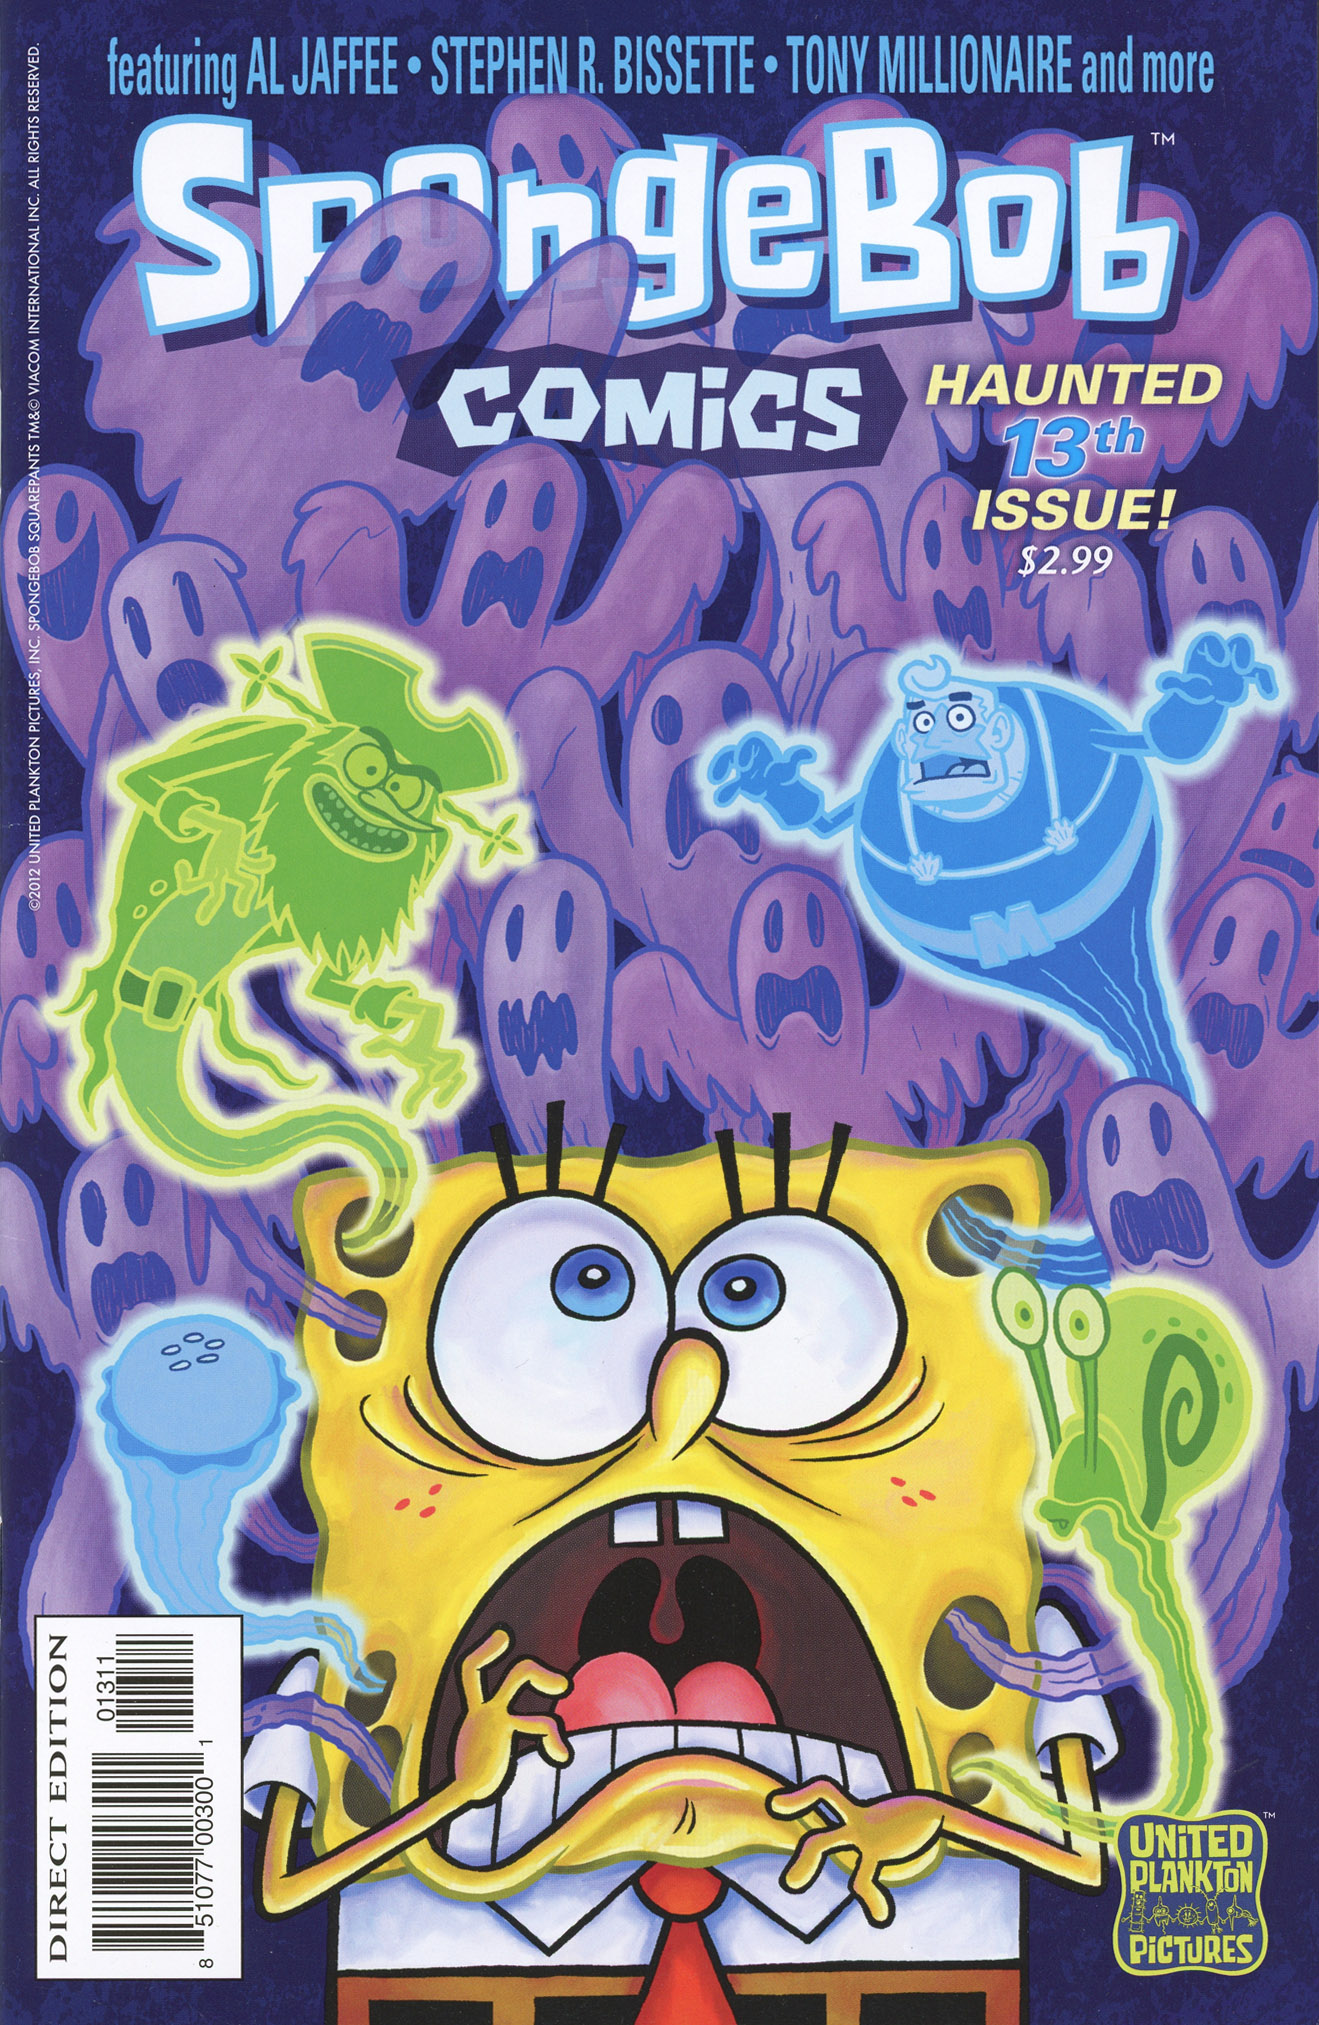 Haunted 13th Issue